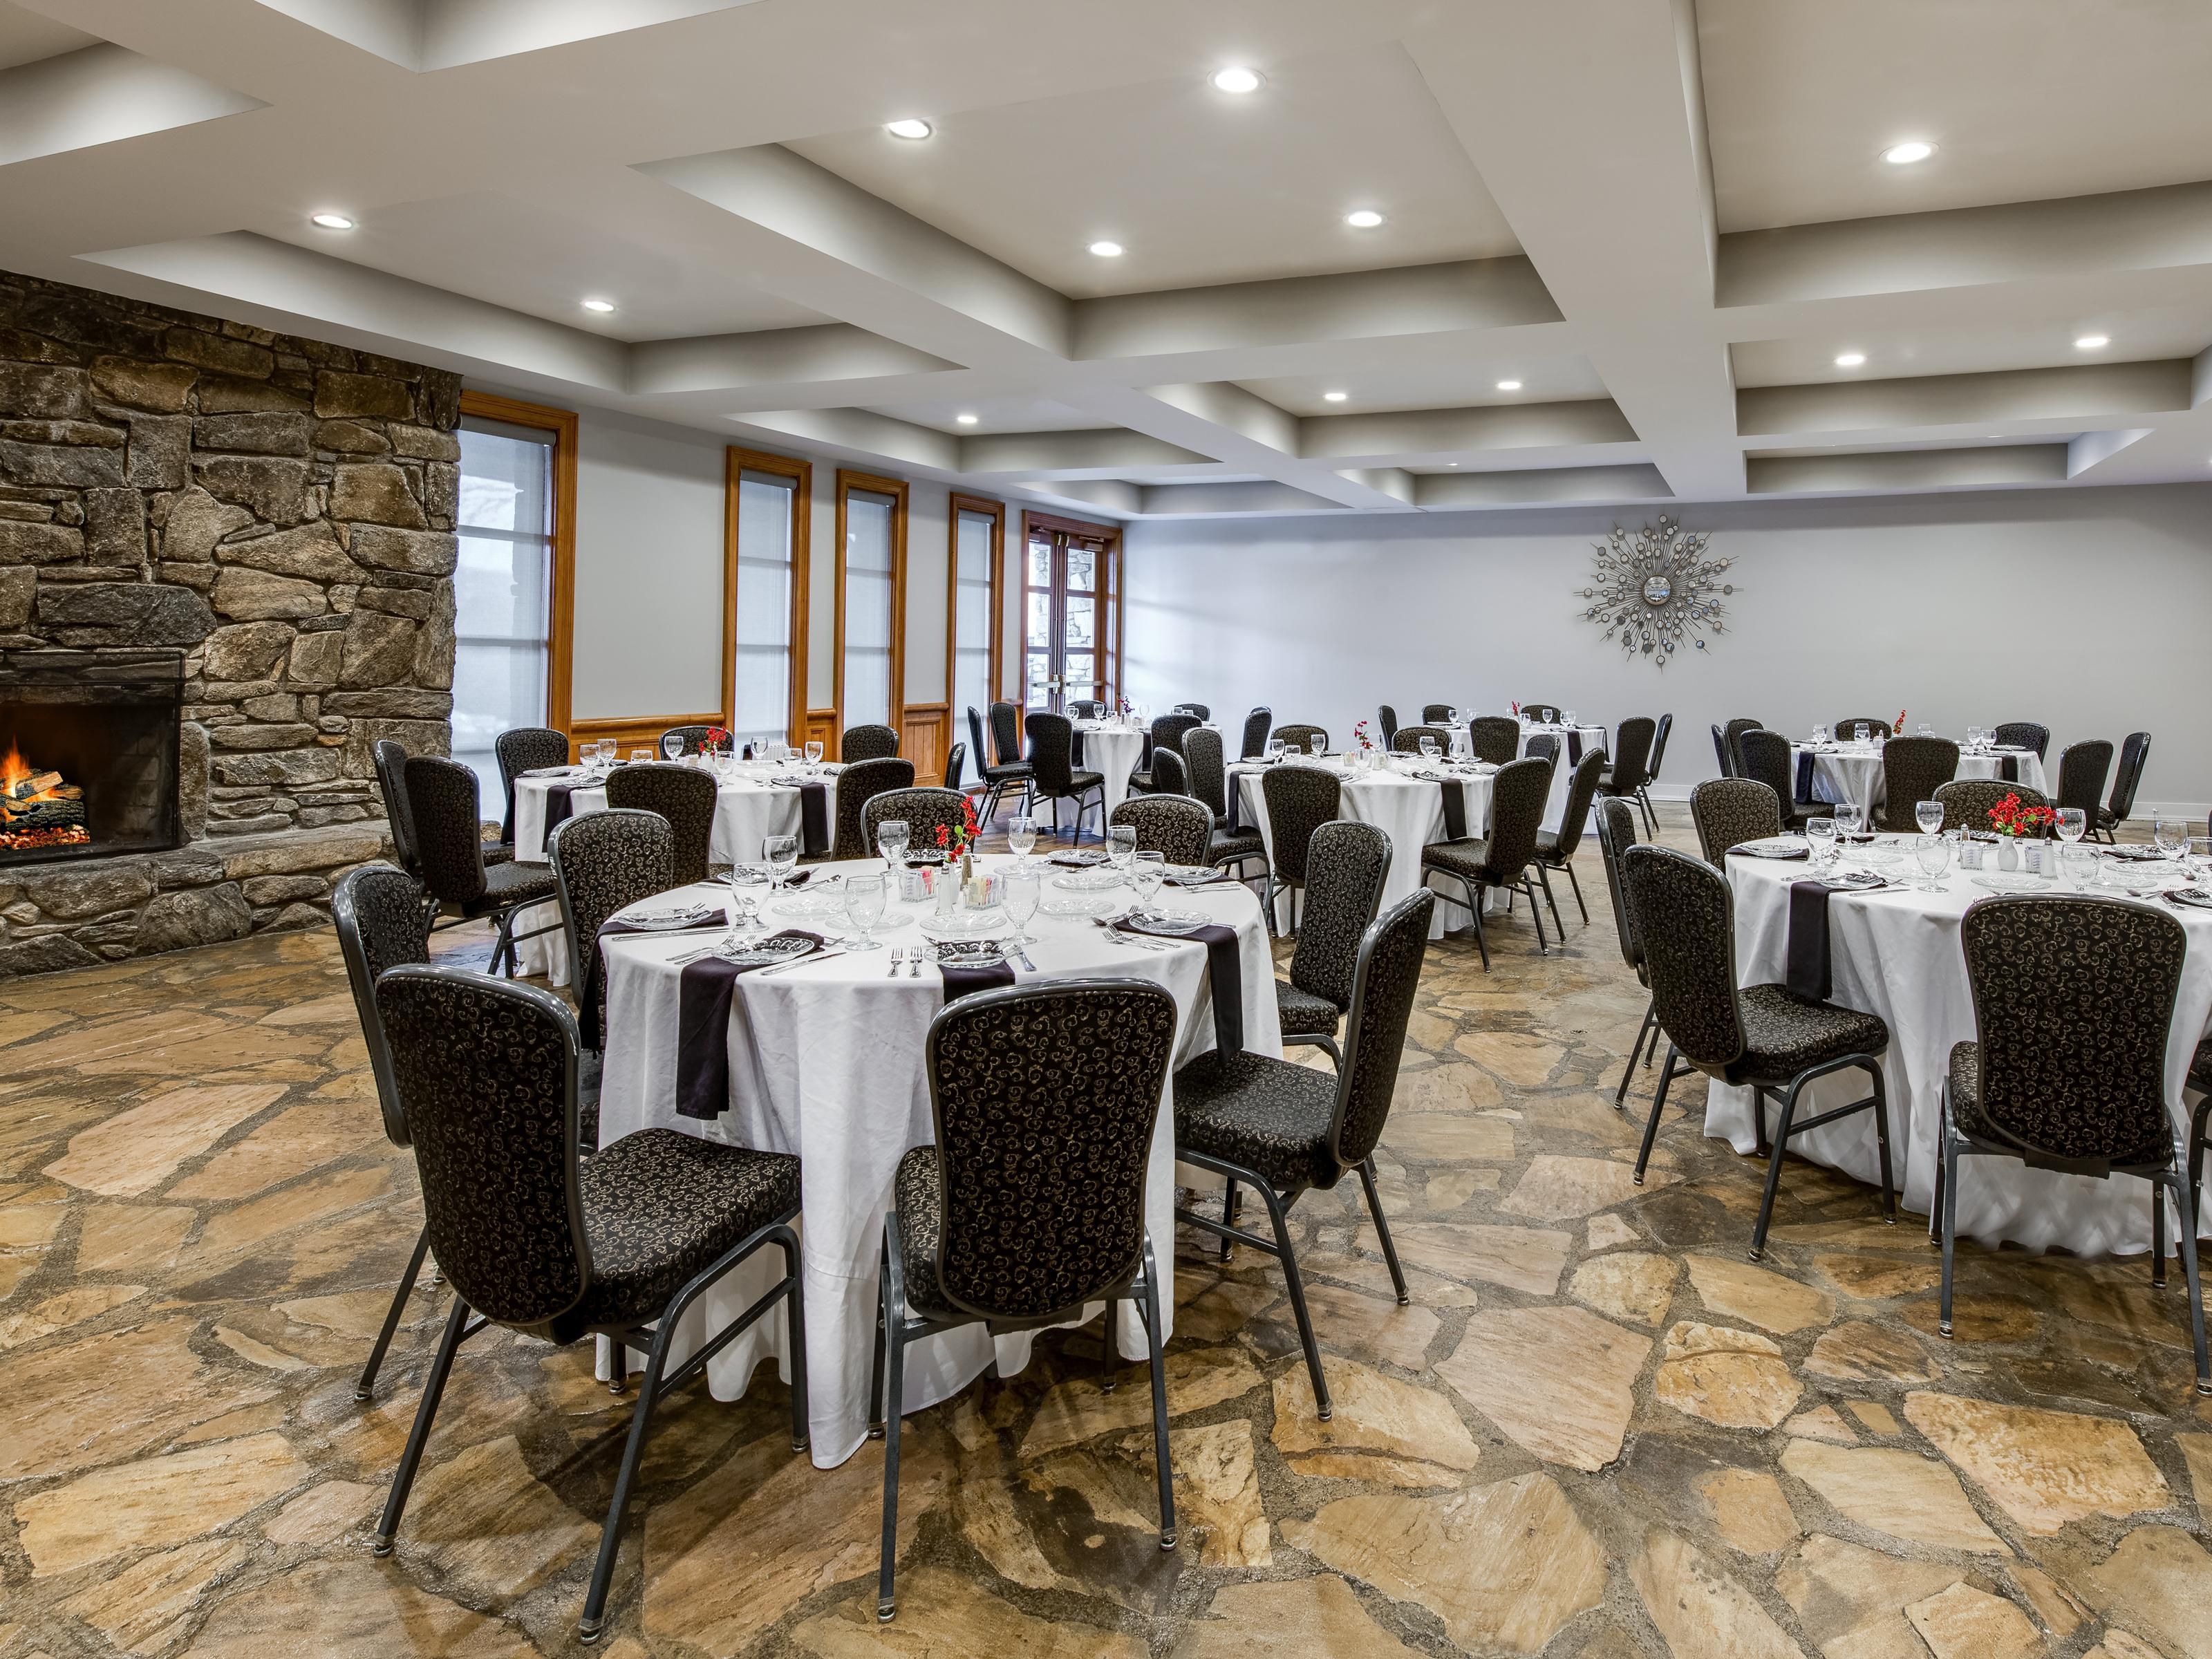 Looking for a conference or wedding venue? Plan your next signature event in the spacious meeting rooms, ballrooms, and outdoor areas at our wonderful resort. Ensure all details are met with the help of our friendly and dedicated Meetings Director who will help plan everything from catering to furnishings. 